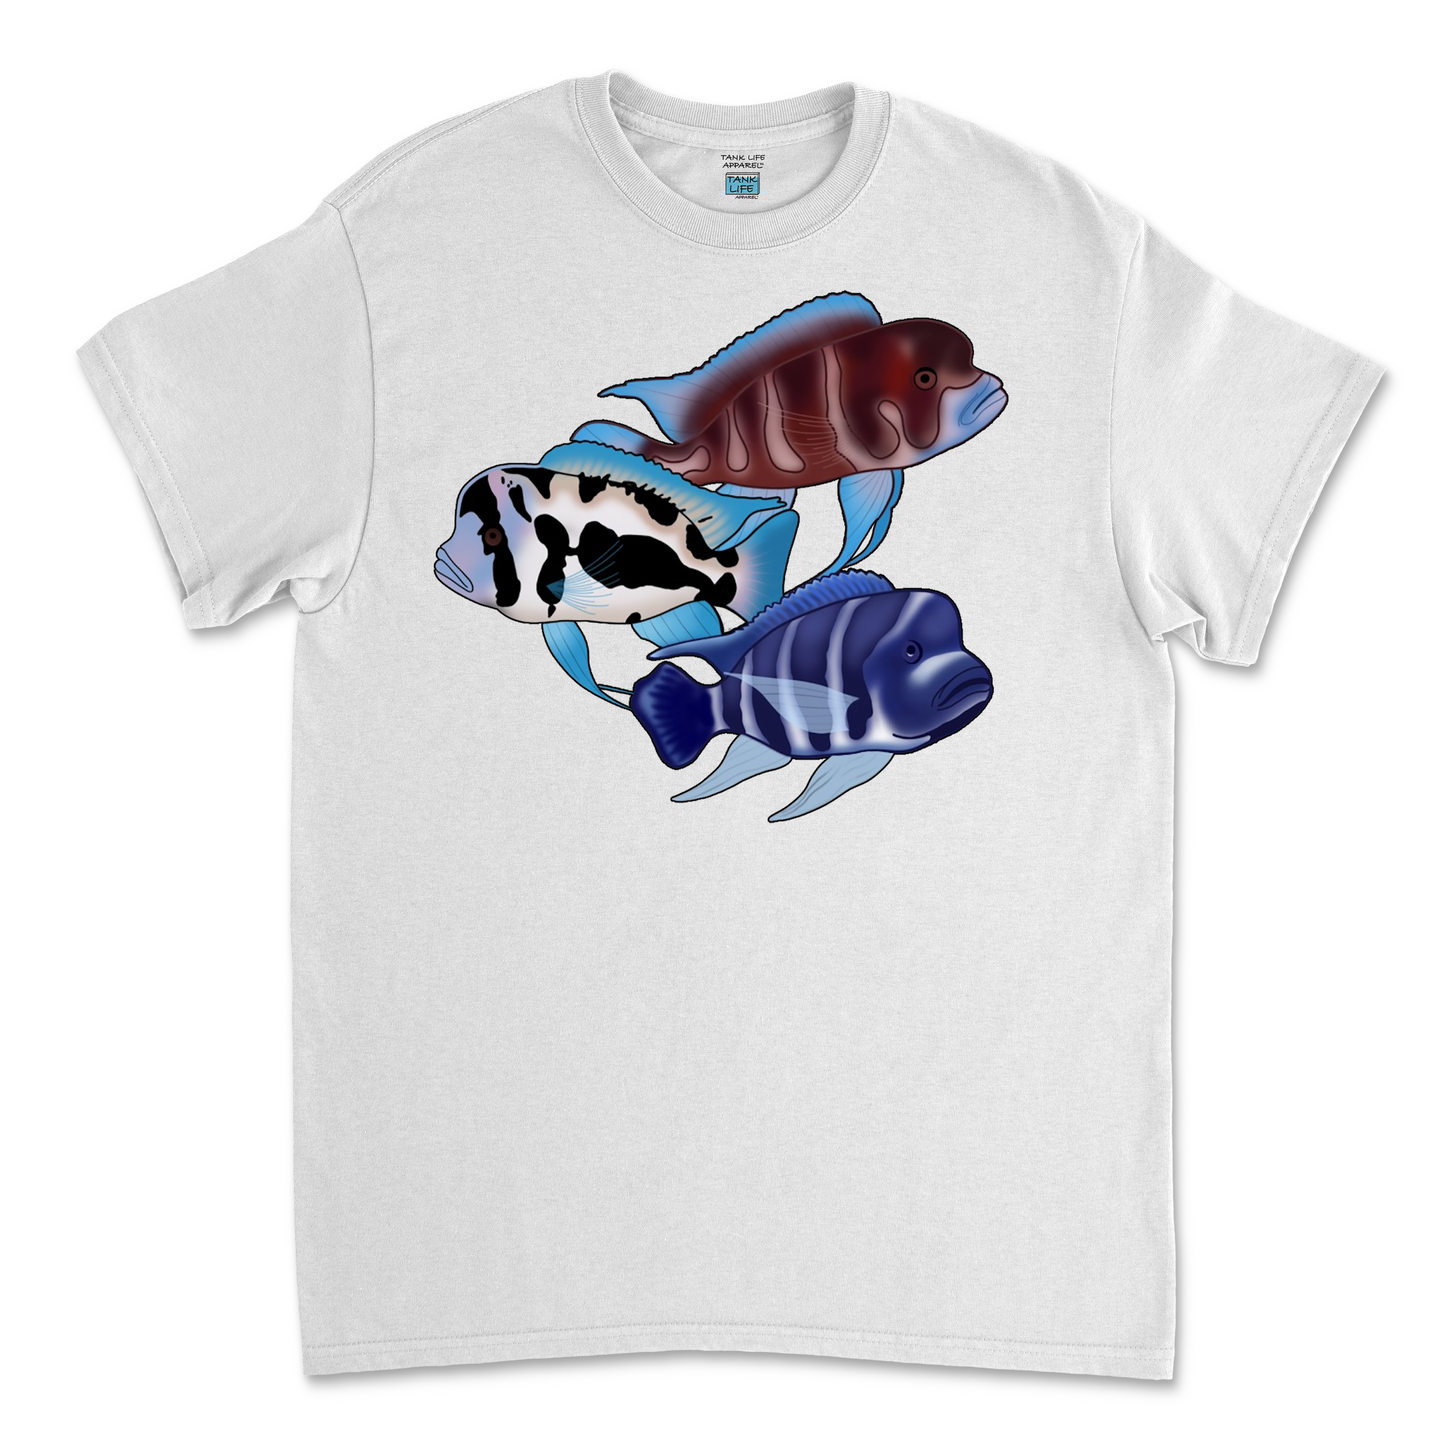 The Tank Life Apparel frontosa cichlid design on a youth tee. Three fish Black widow, red frontosa, blue zaire. Blue fish with dark stripes.